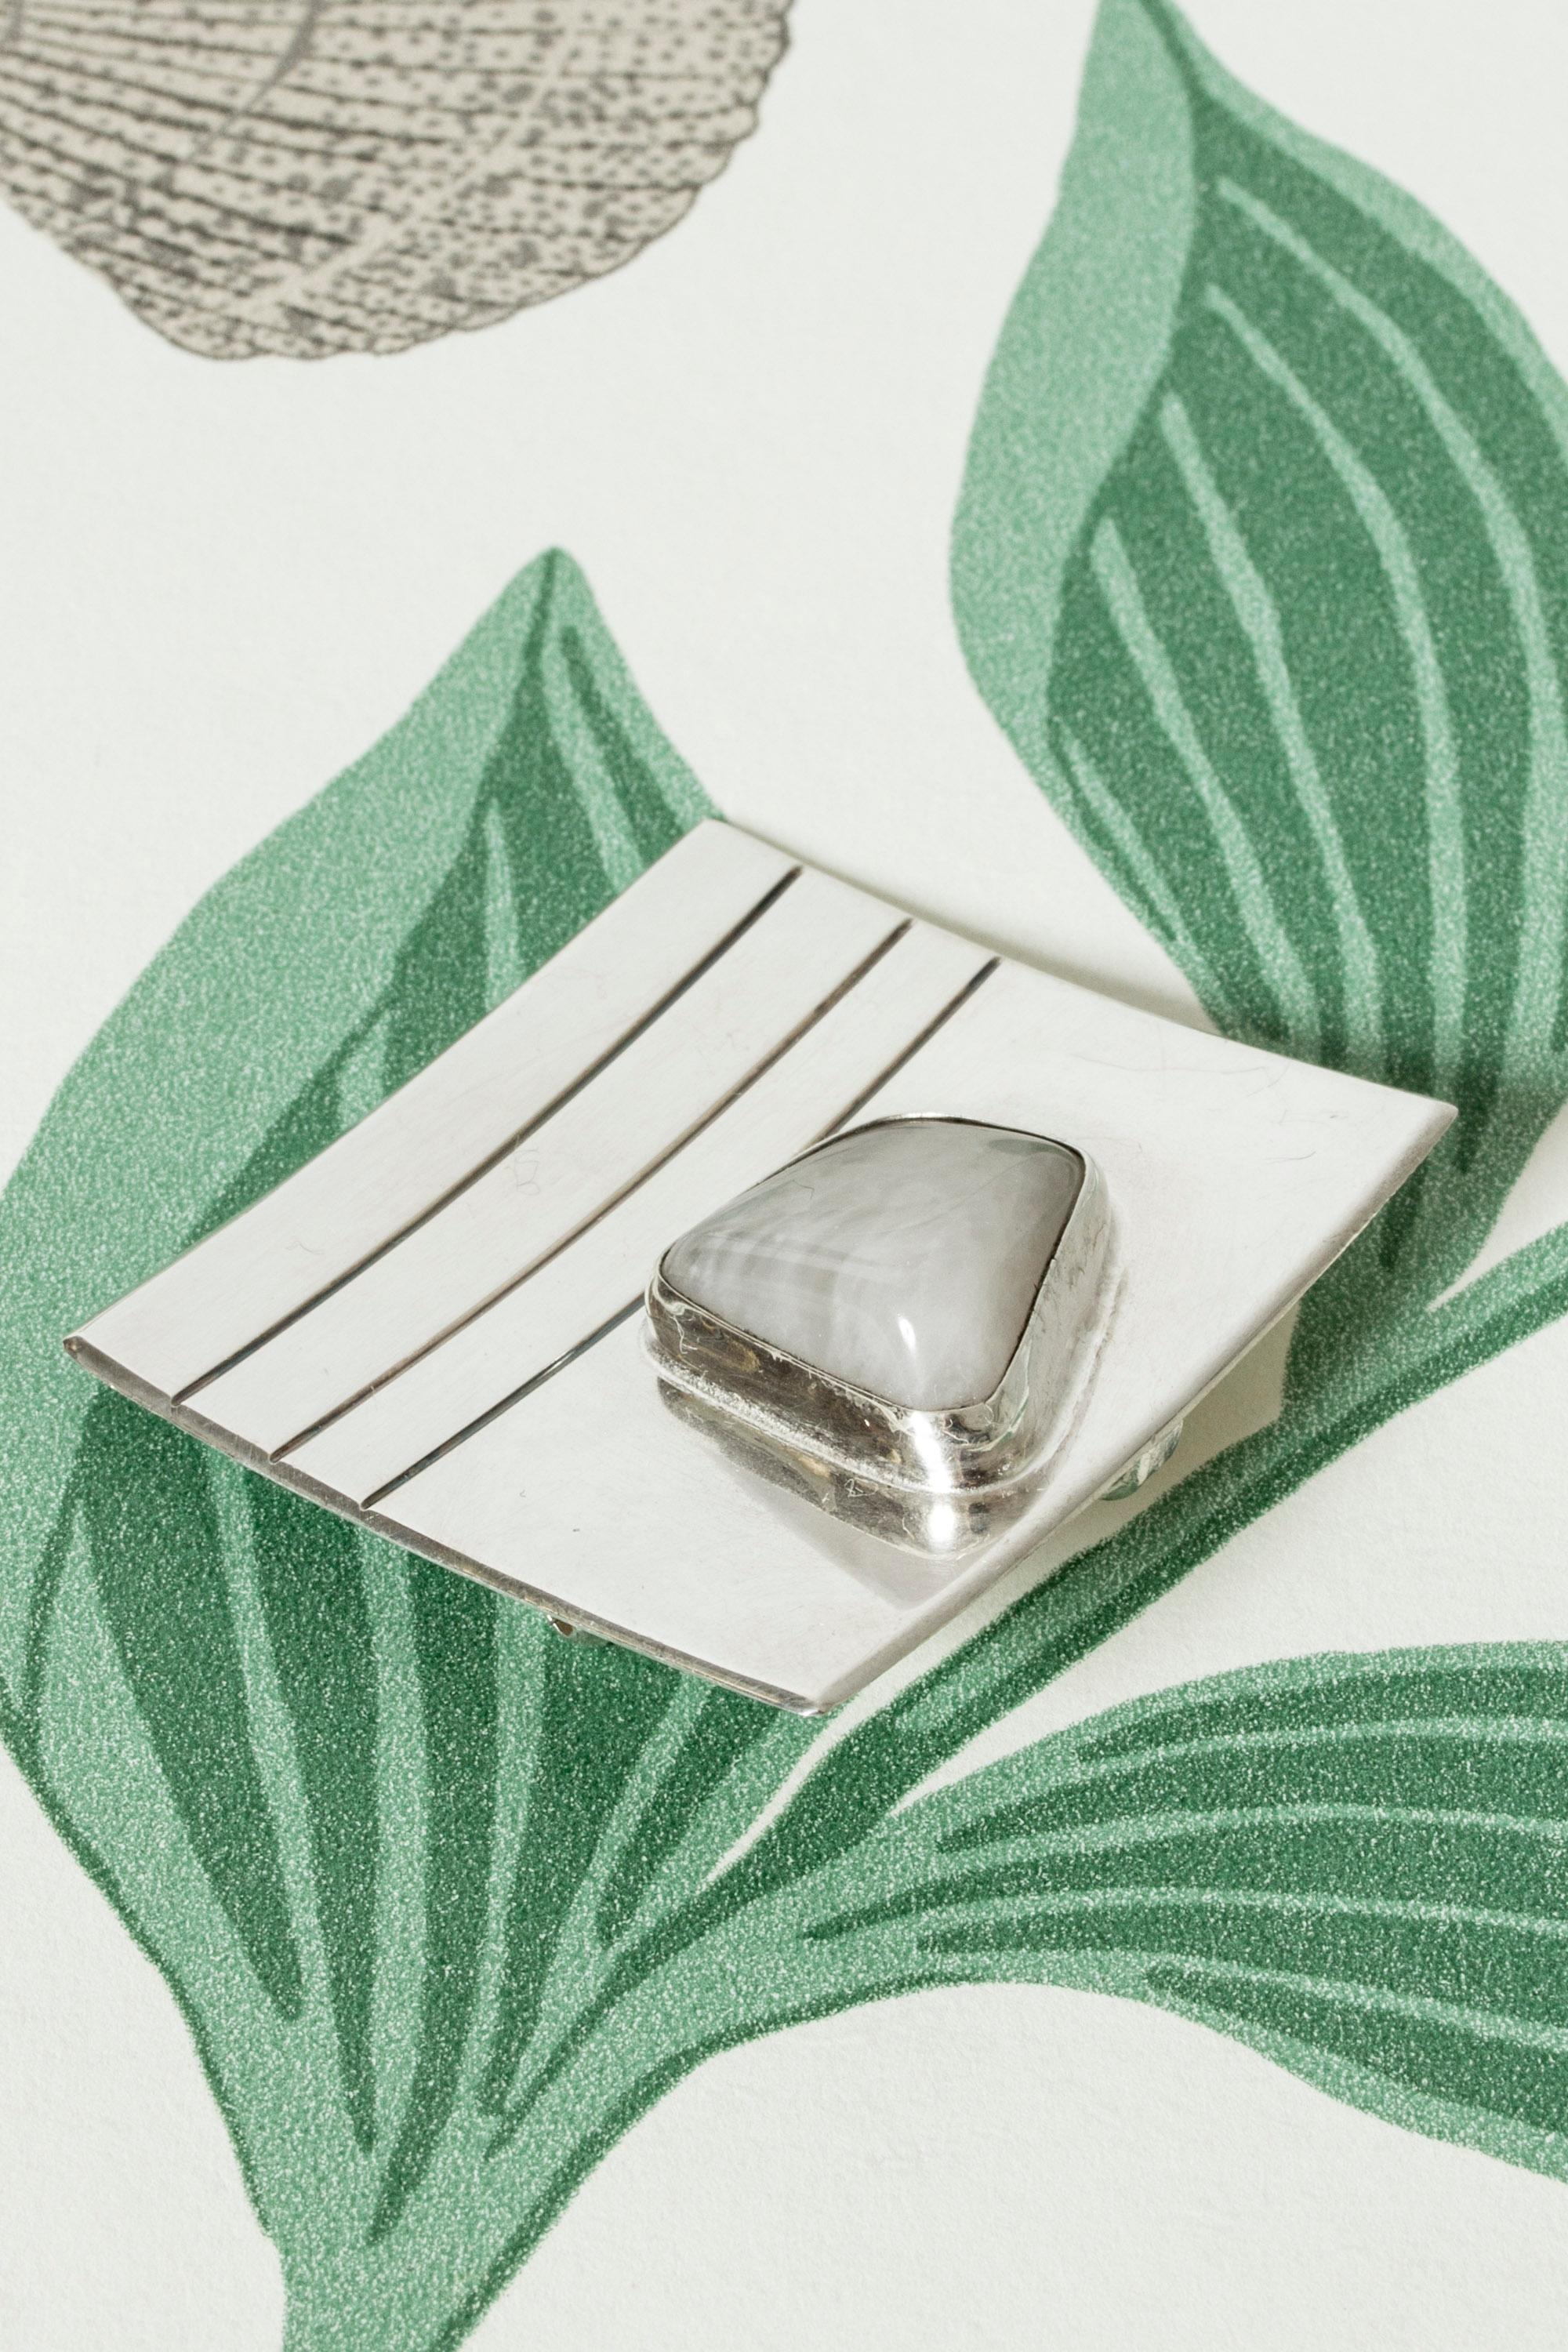 Cool, large brooch by Heikki Kaksonen, made from silver in a square form with embossed stripes. A smoothly tumbled moonstone makes a beautiful organic addition to the strict silver form.

